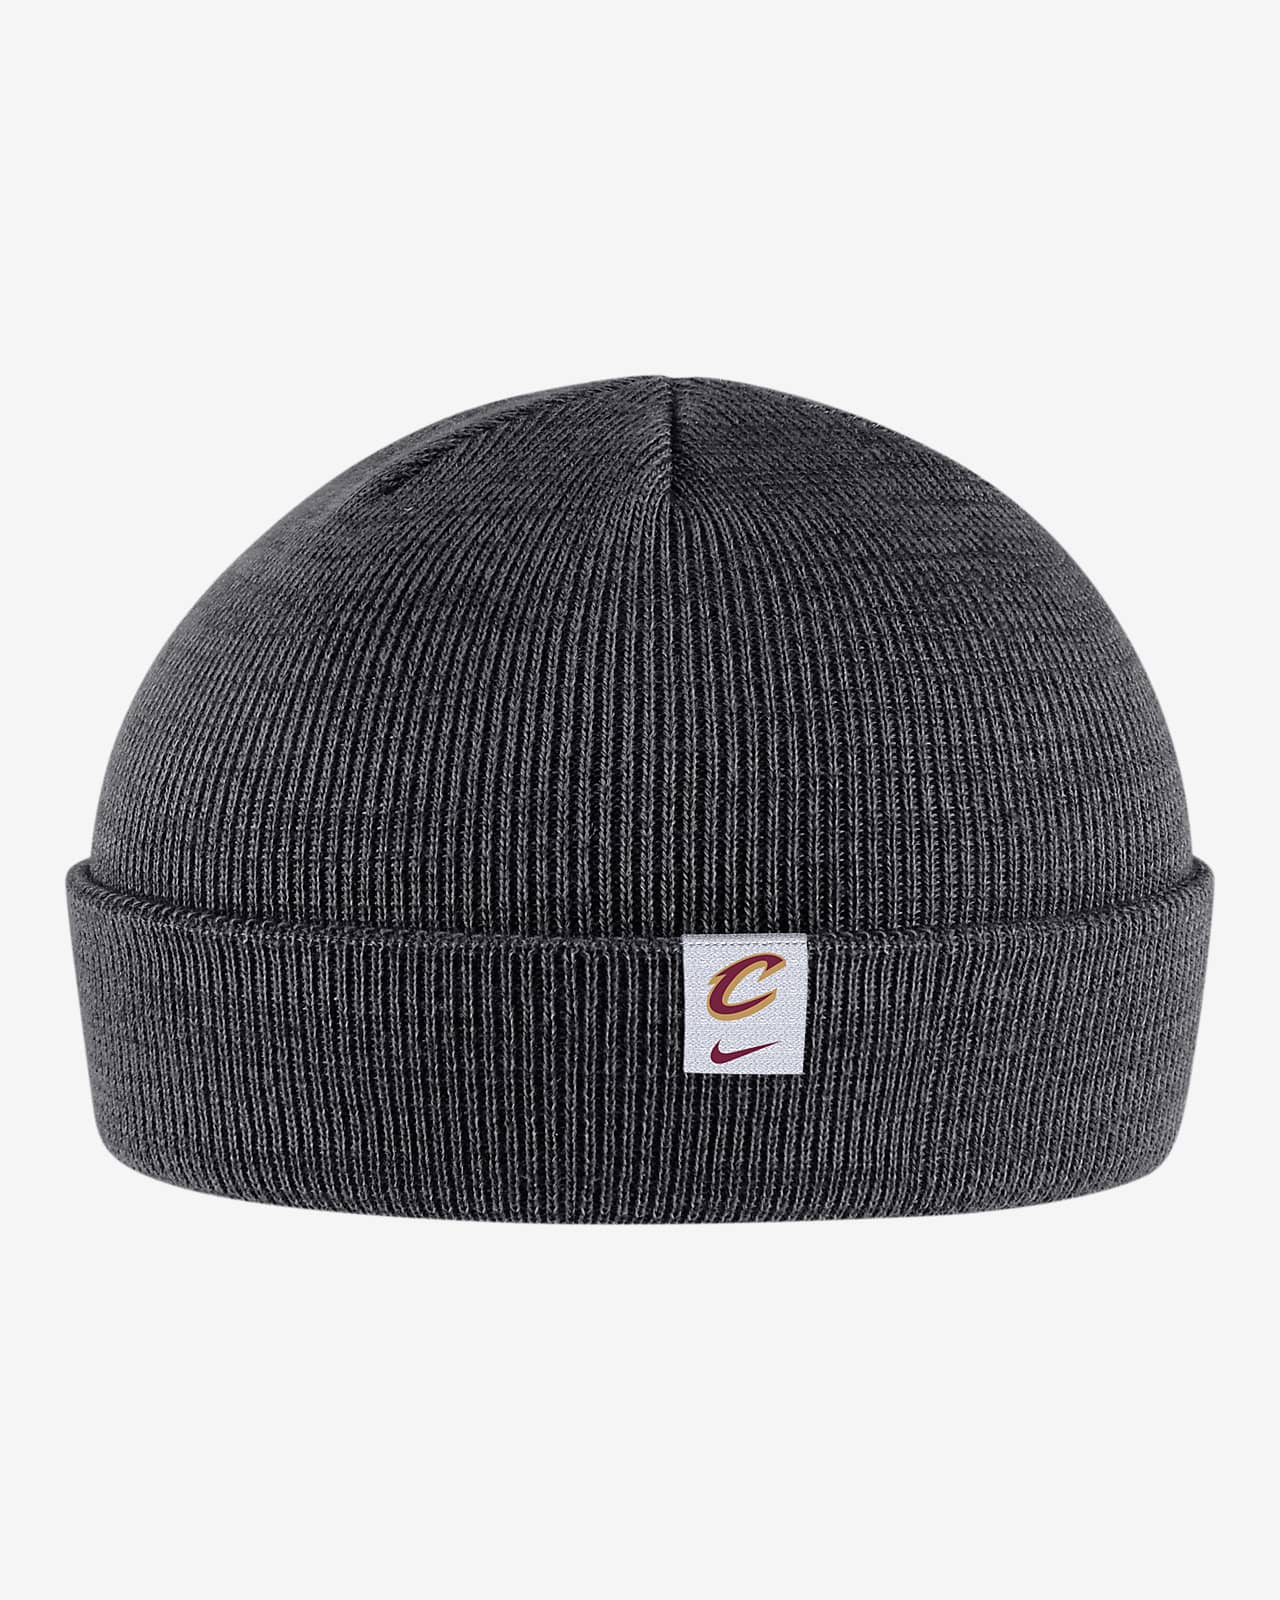 Cleveland Cavaliers Icon Edition Nike Fisherman Beanie